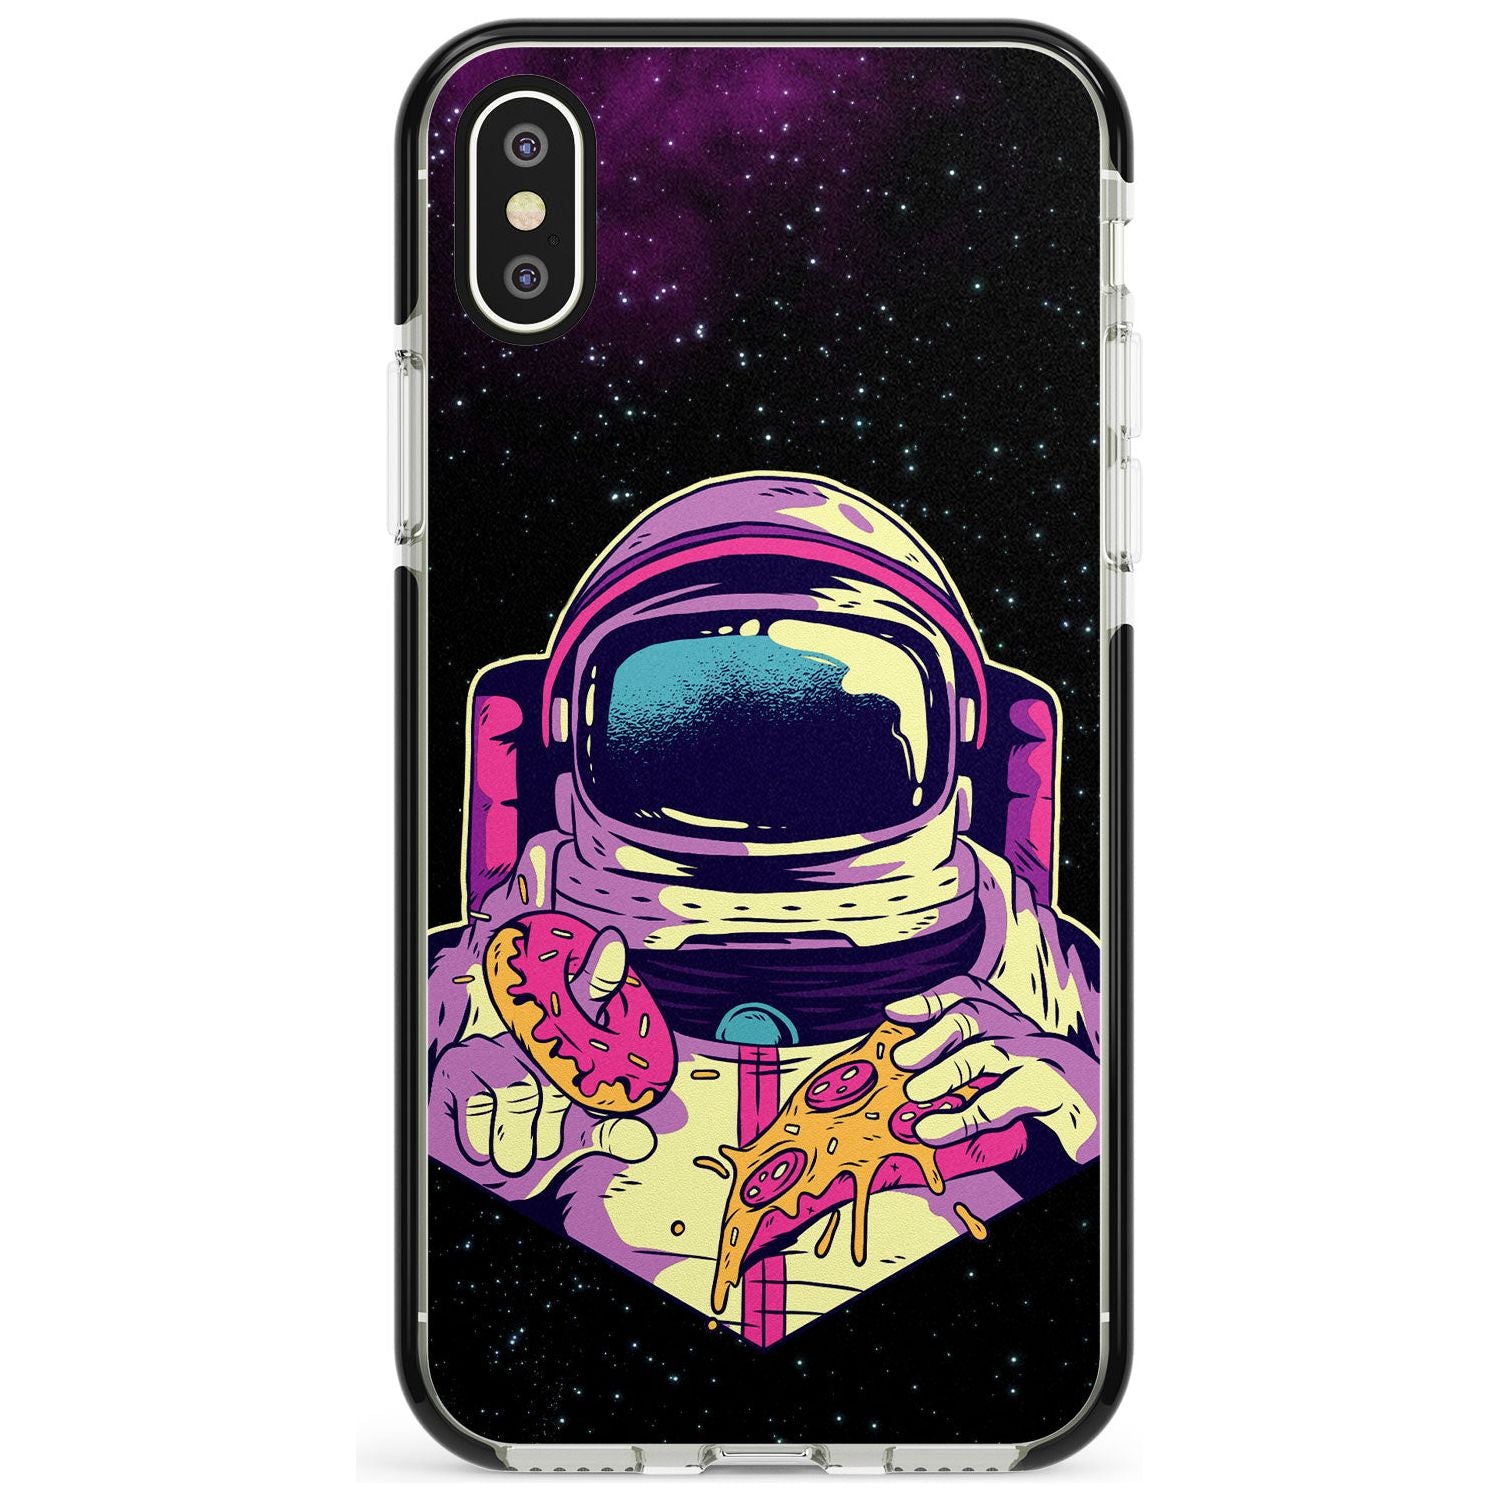 Astro Cheat Meal Black Impact Phone Case for iPhone X XS Max XR